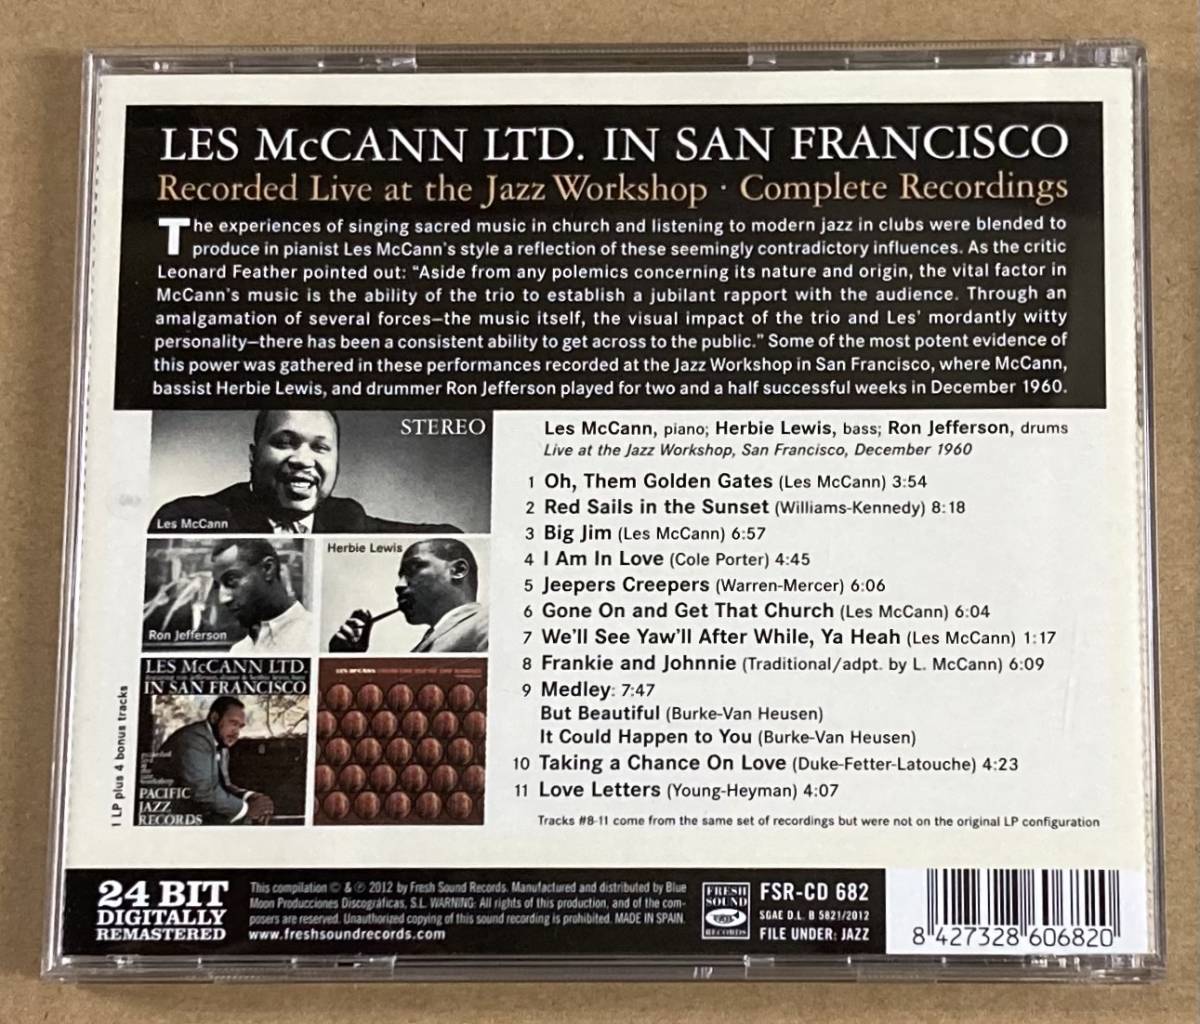 【CD】LES MCCANN／IN SAN FRANCISCO & FROM THE TOP OF THE BARREL《輸入盤》《FRESH SOUND》レス マッキャン_画像2